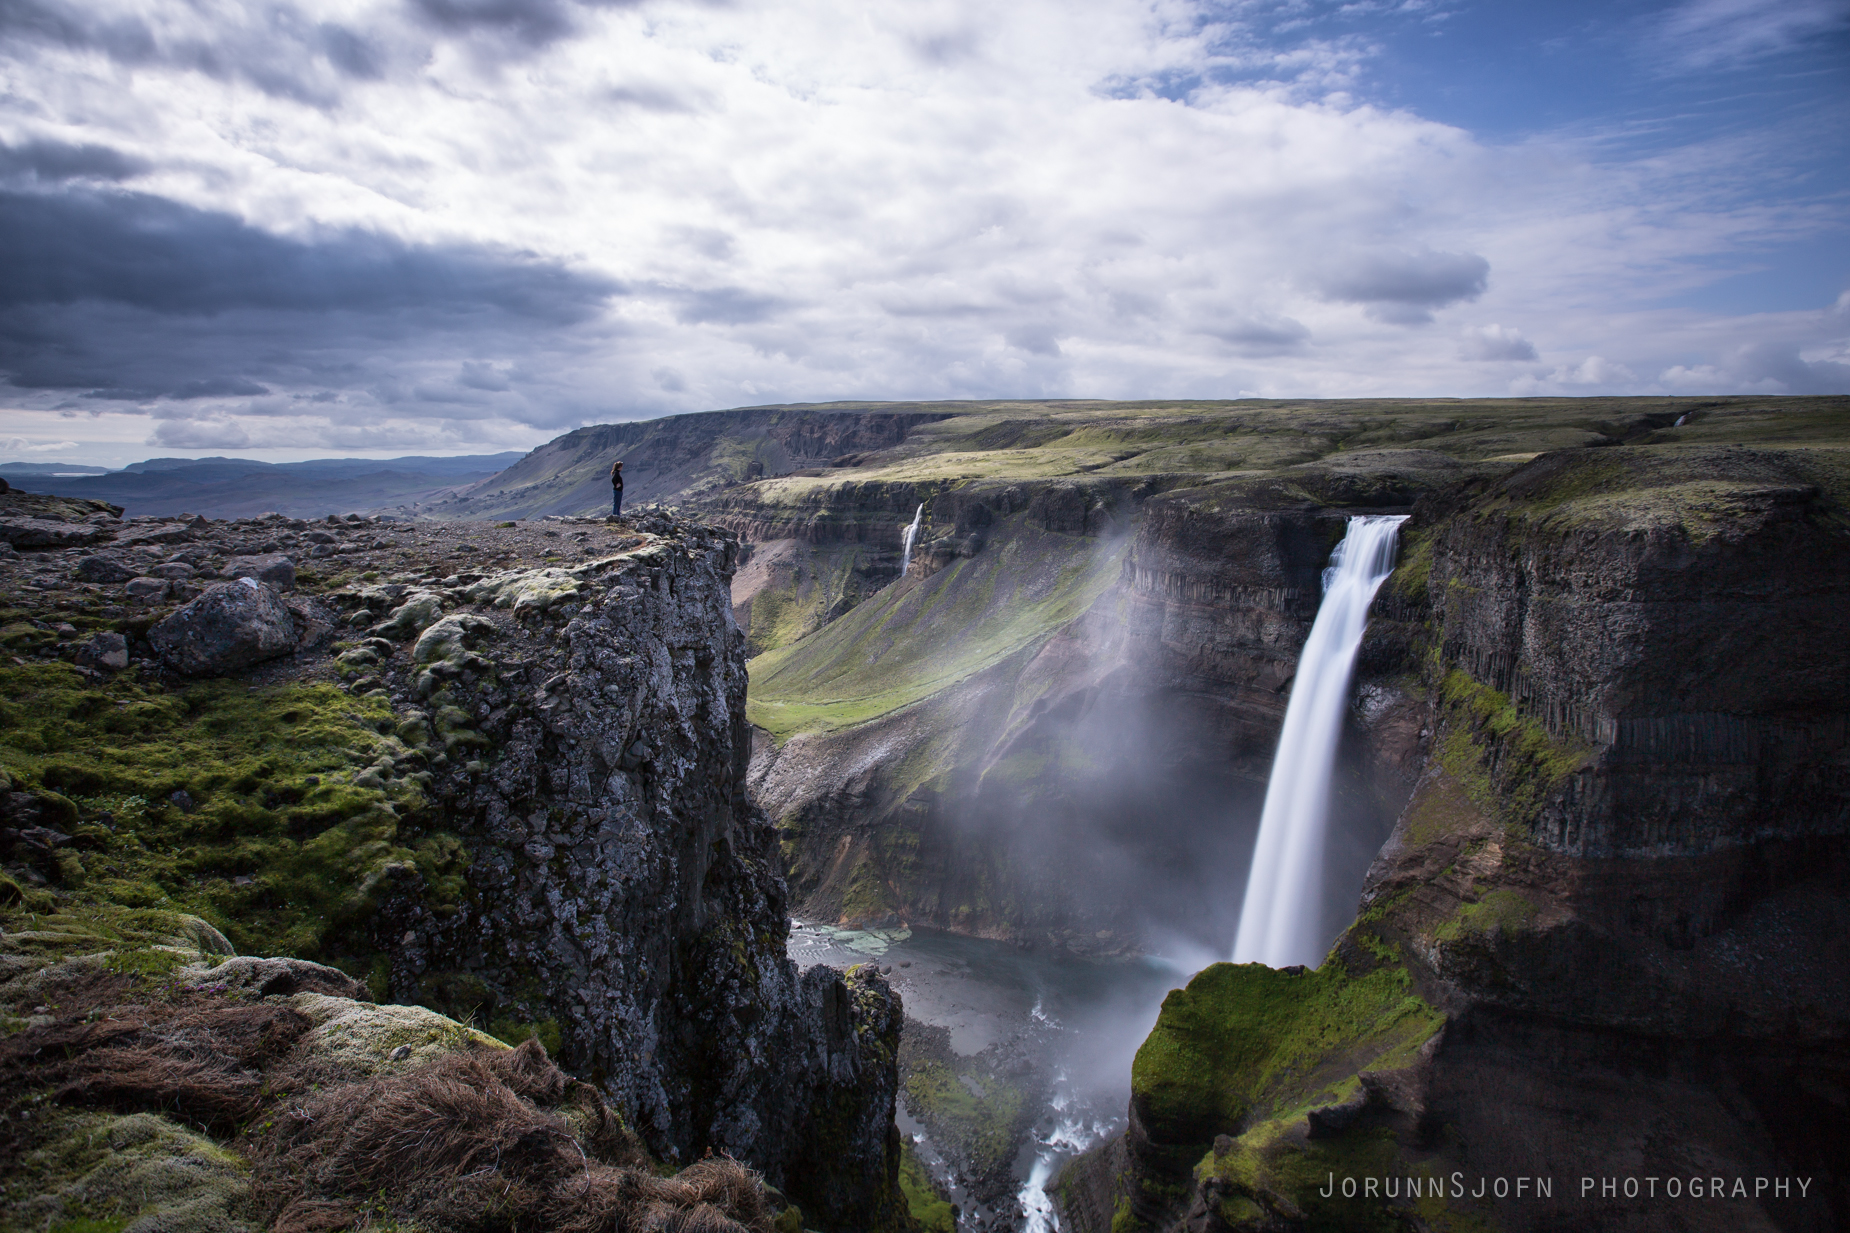 Chasing Waterfalls In Iceland Guide To Iceland